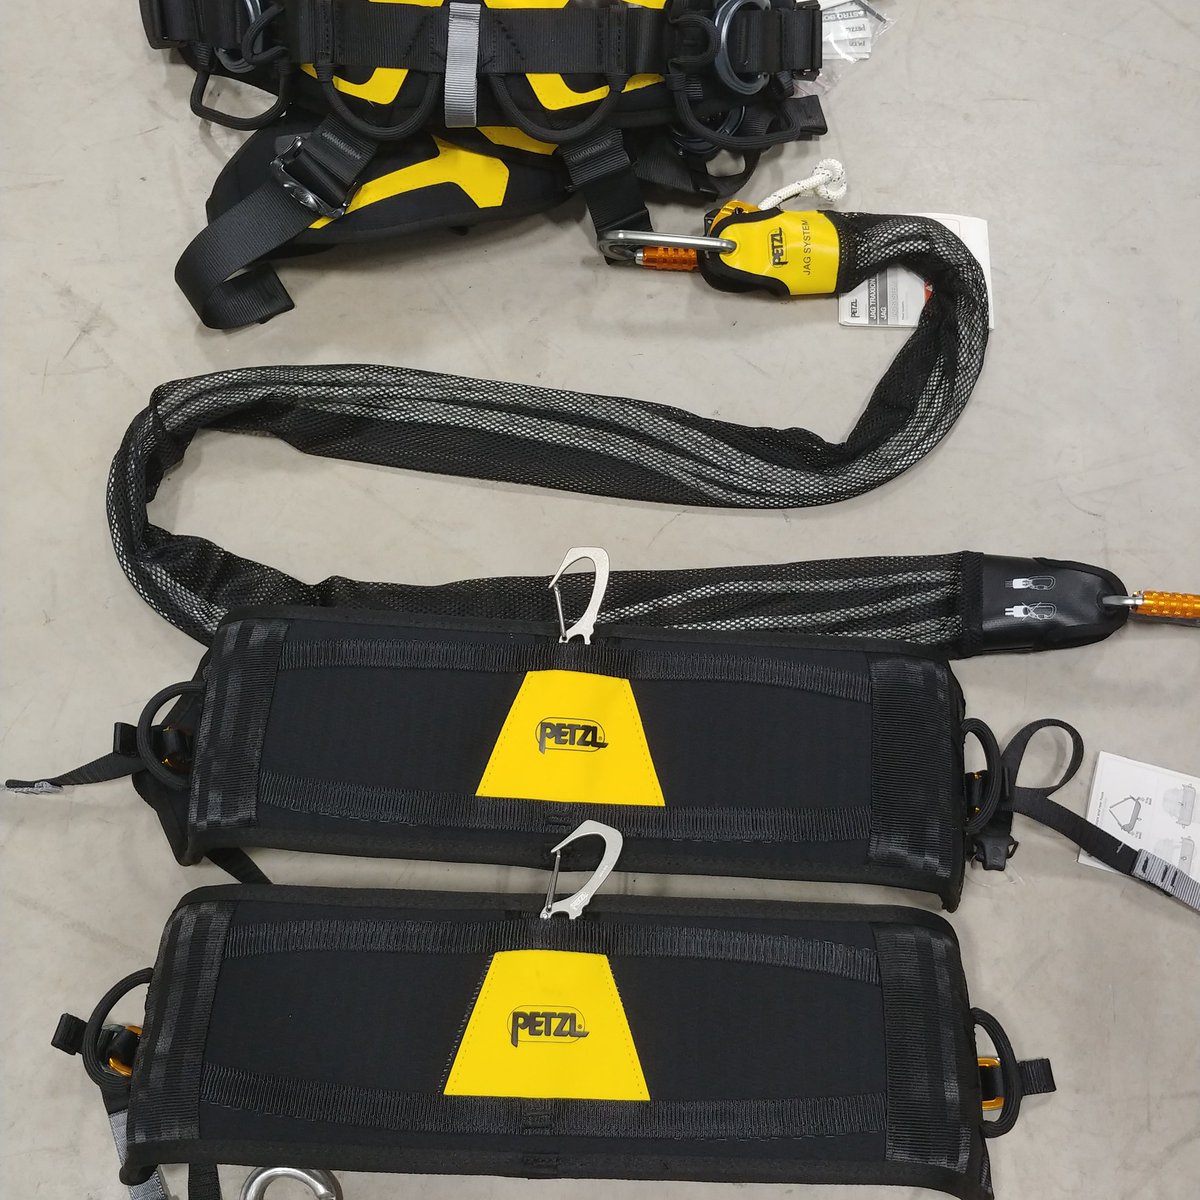 Got some great new gear from #petzlprofessional just in time for a full rope access class! The New Astro Harness is great! And now everyone has. Work seat! The jag system is an easy alternative in pick off rescues.